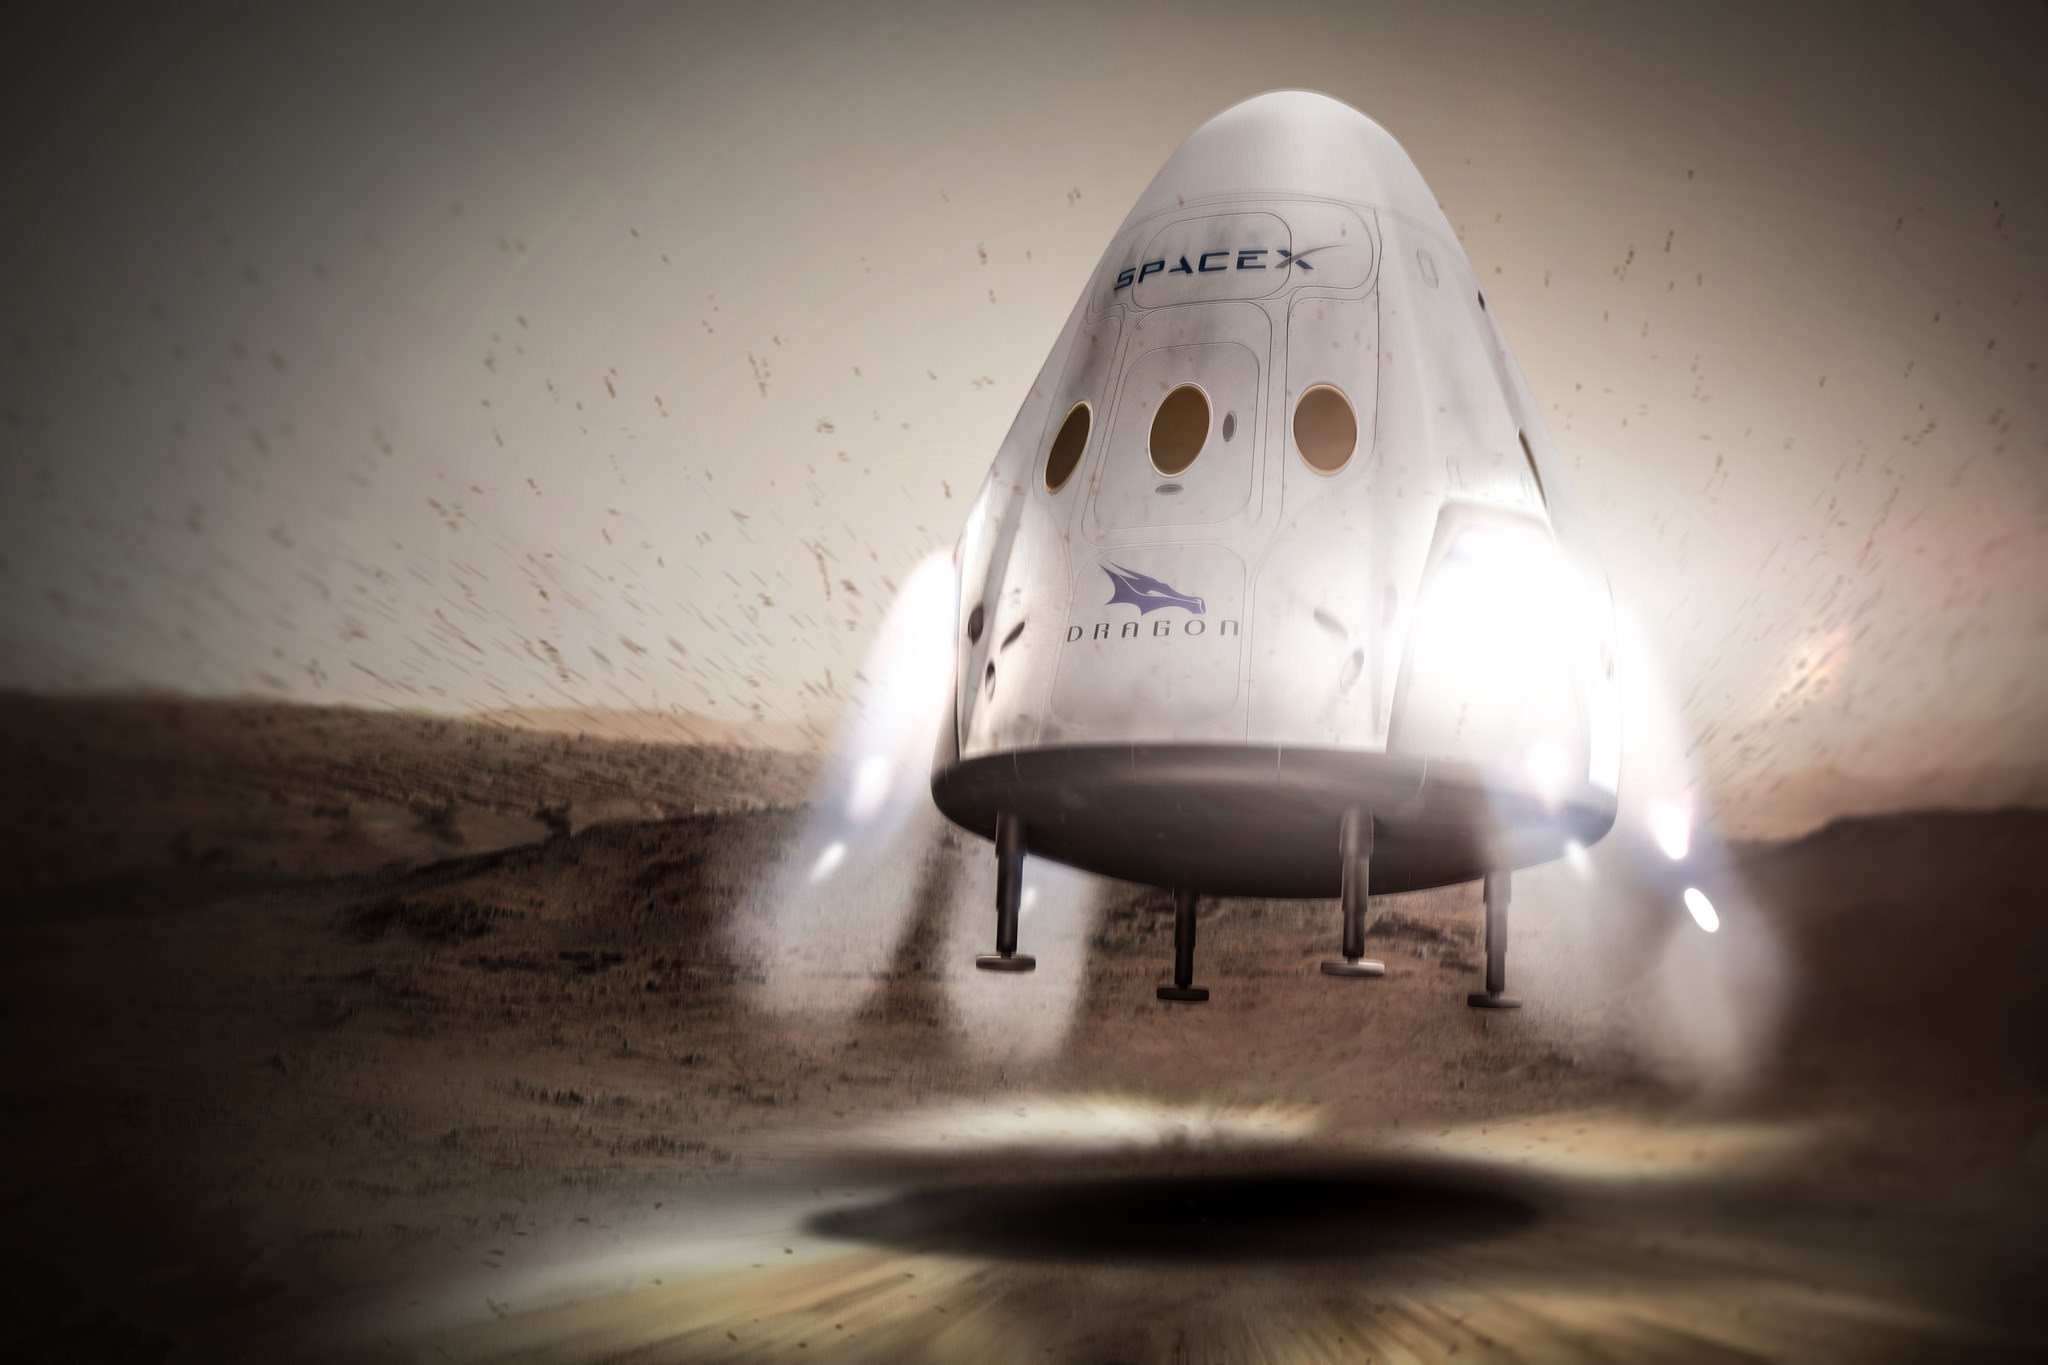 Artists concept for sending SpaceX Red Dragon spacecraft to land propulsively on Mars as early as 2018.  Credit: SpaceX